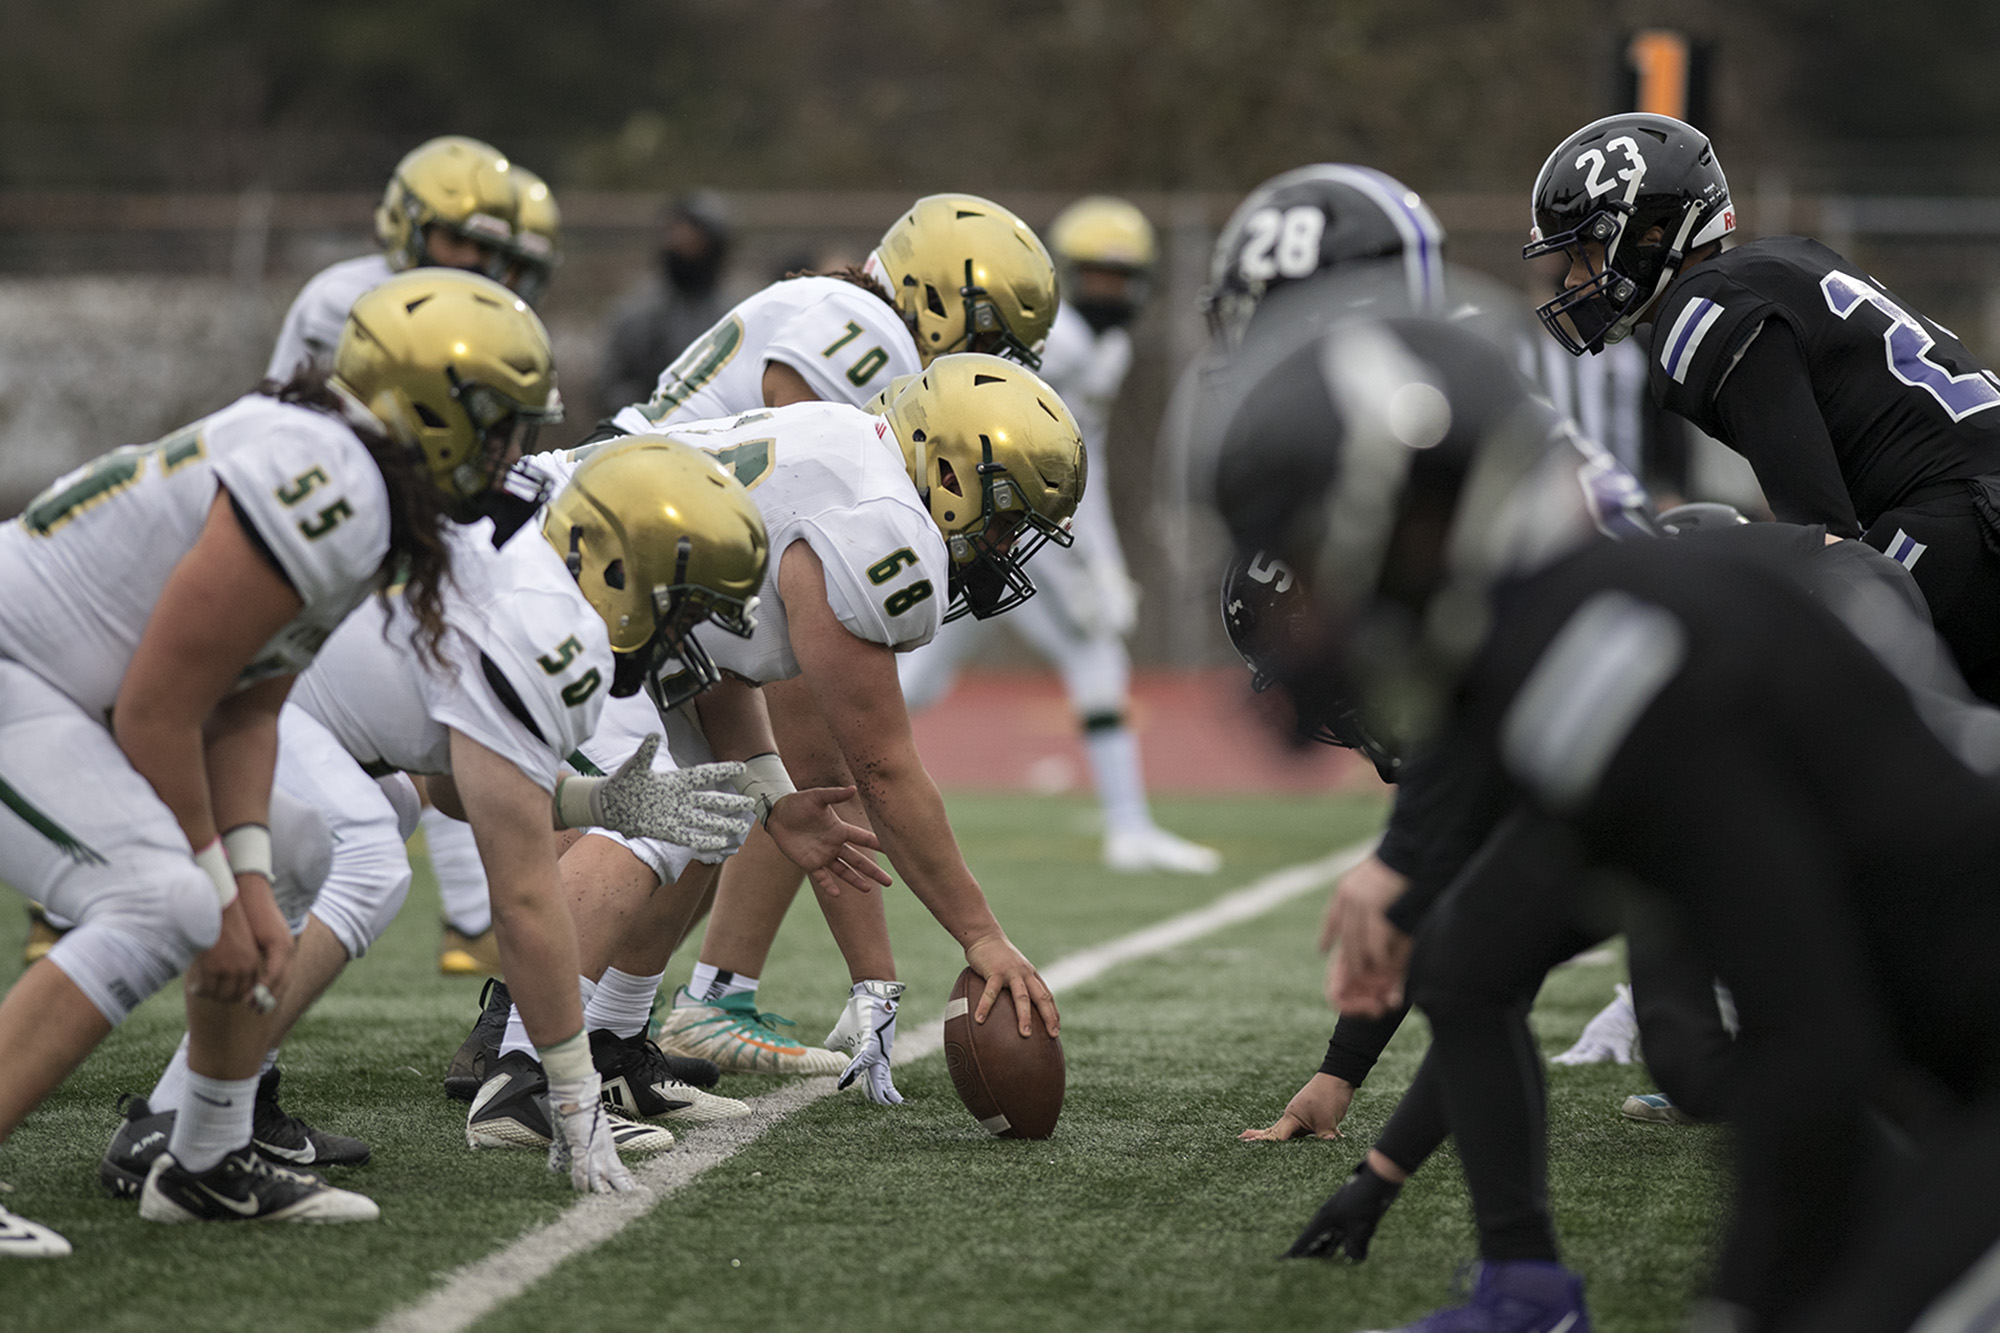 Evergreen players face off against Heritage defenders in the second quarter at McKenzie Stadium on Friday afternoon, March 5, 2021.